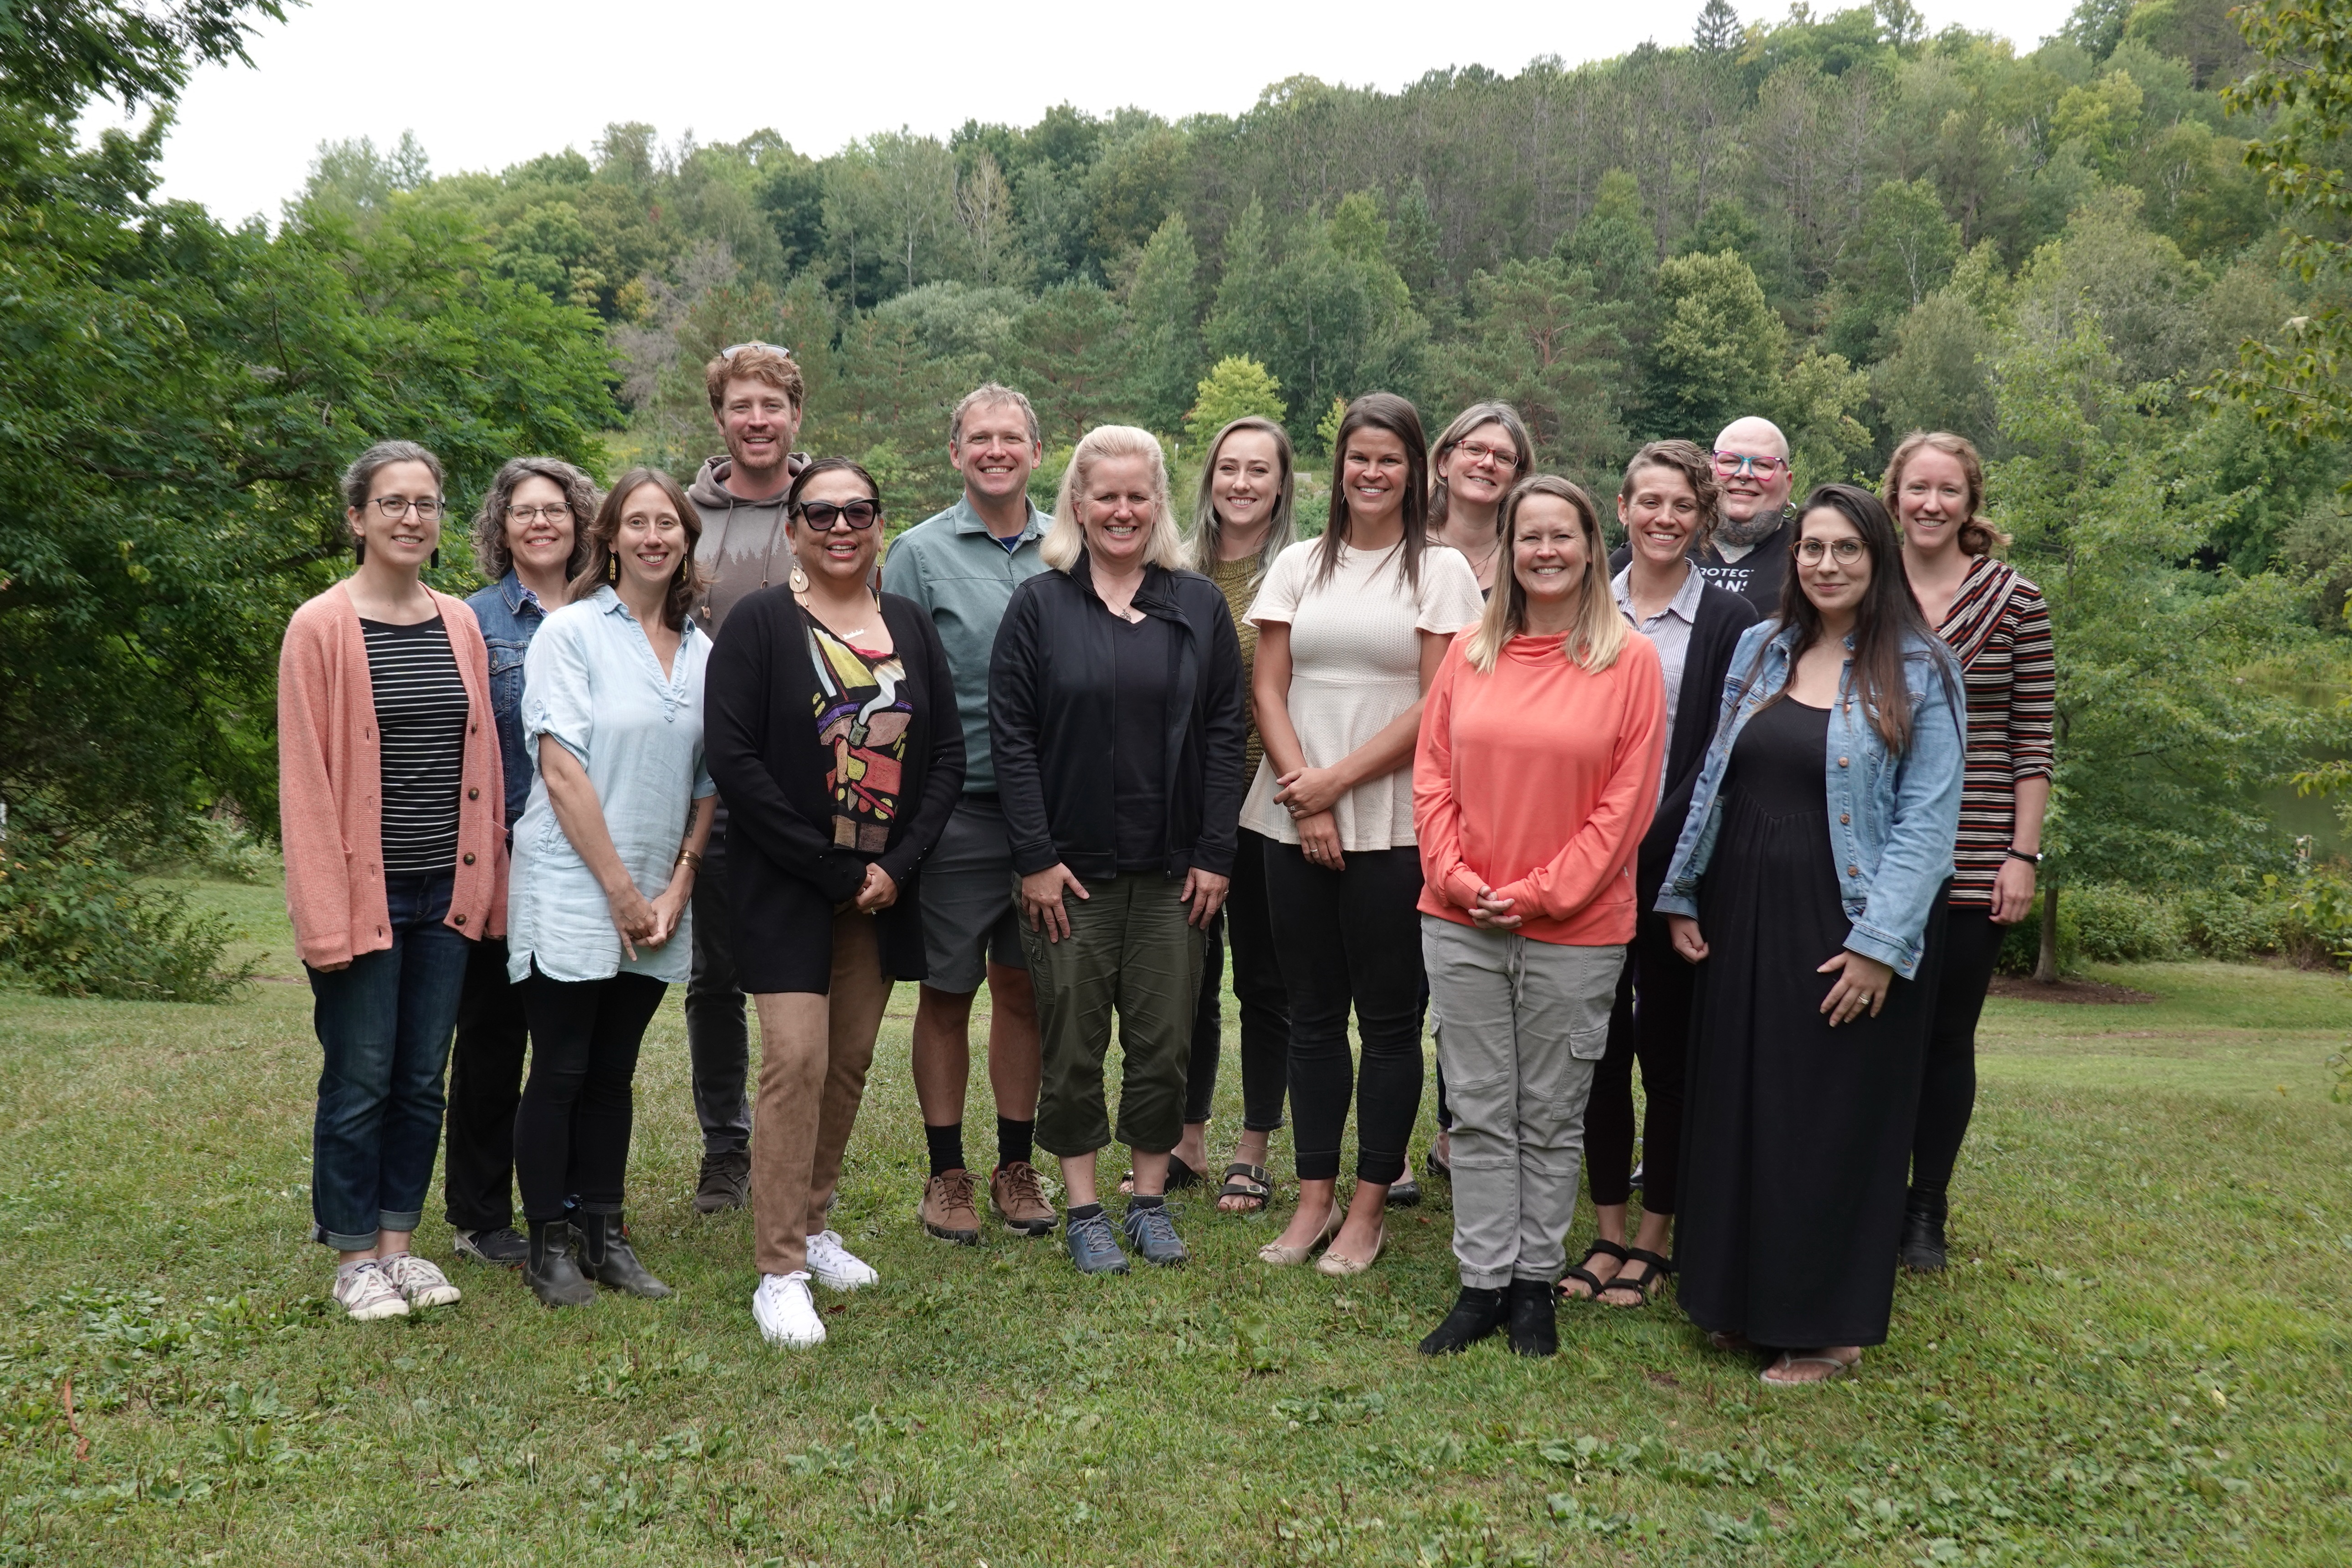 Faculty and Staff of UMD Social Work department in Bagley Nature Center